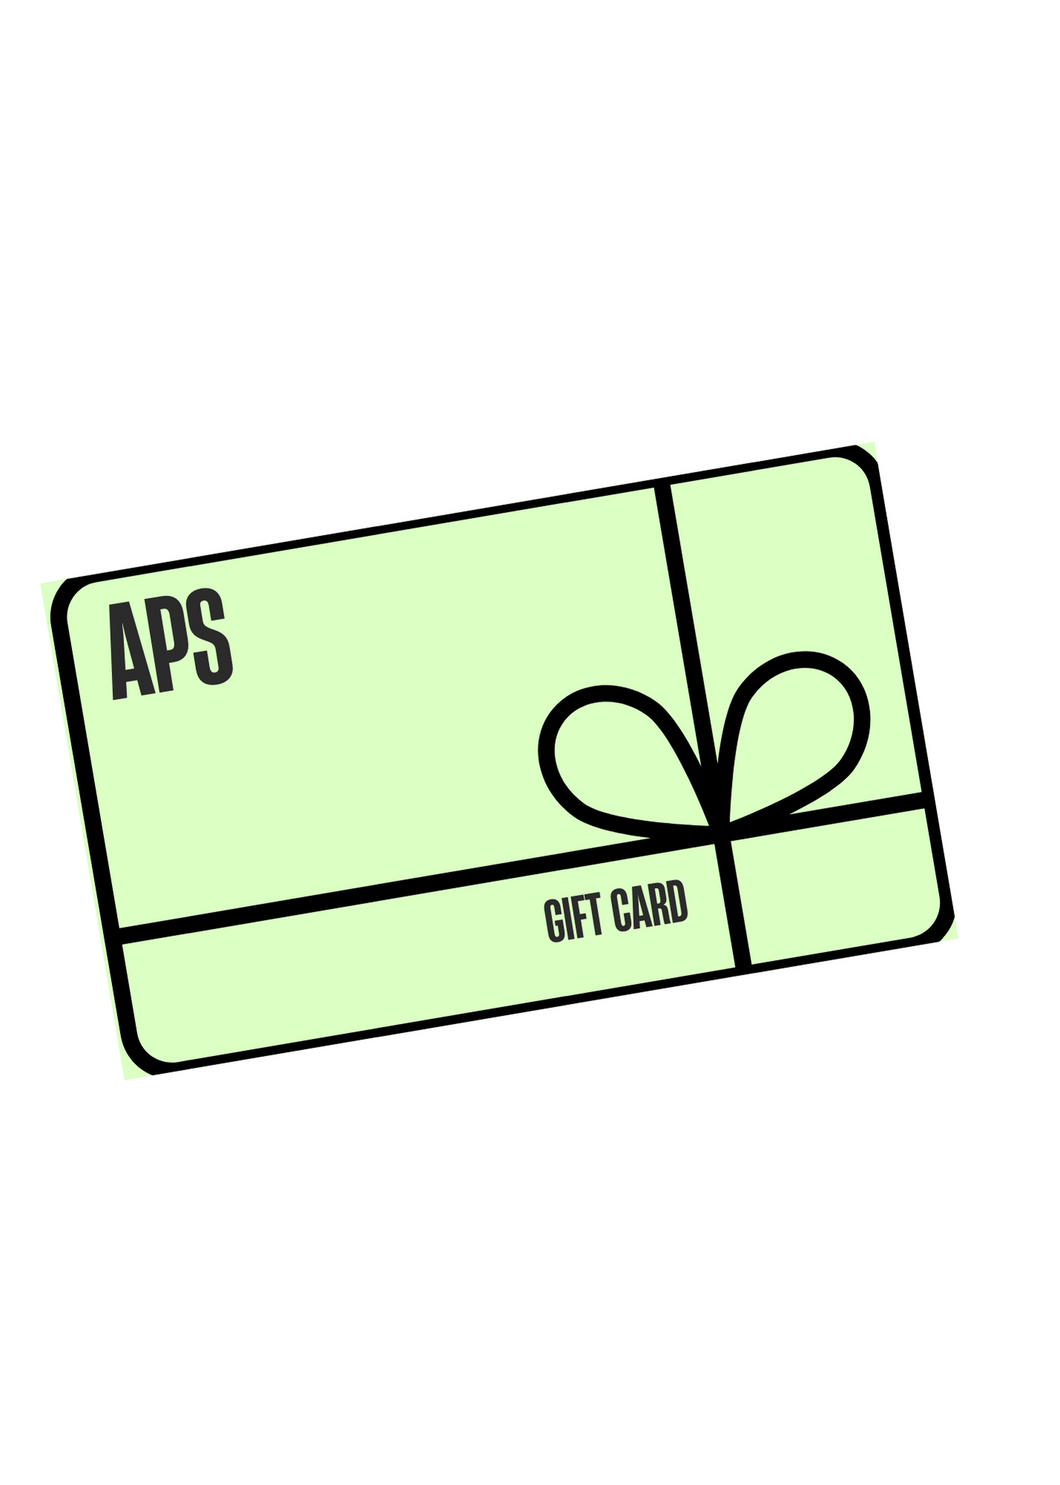 APS gift card